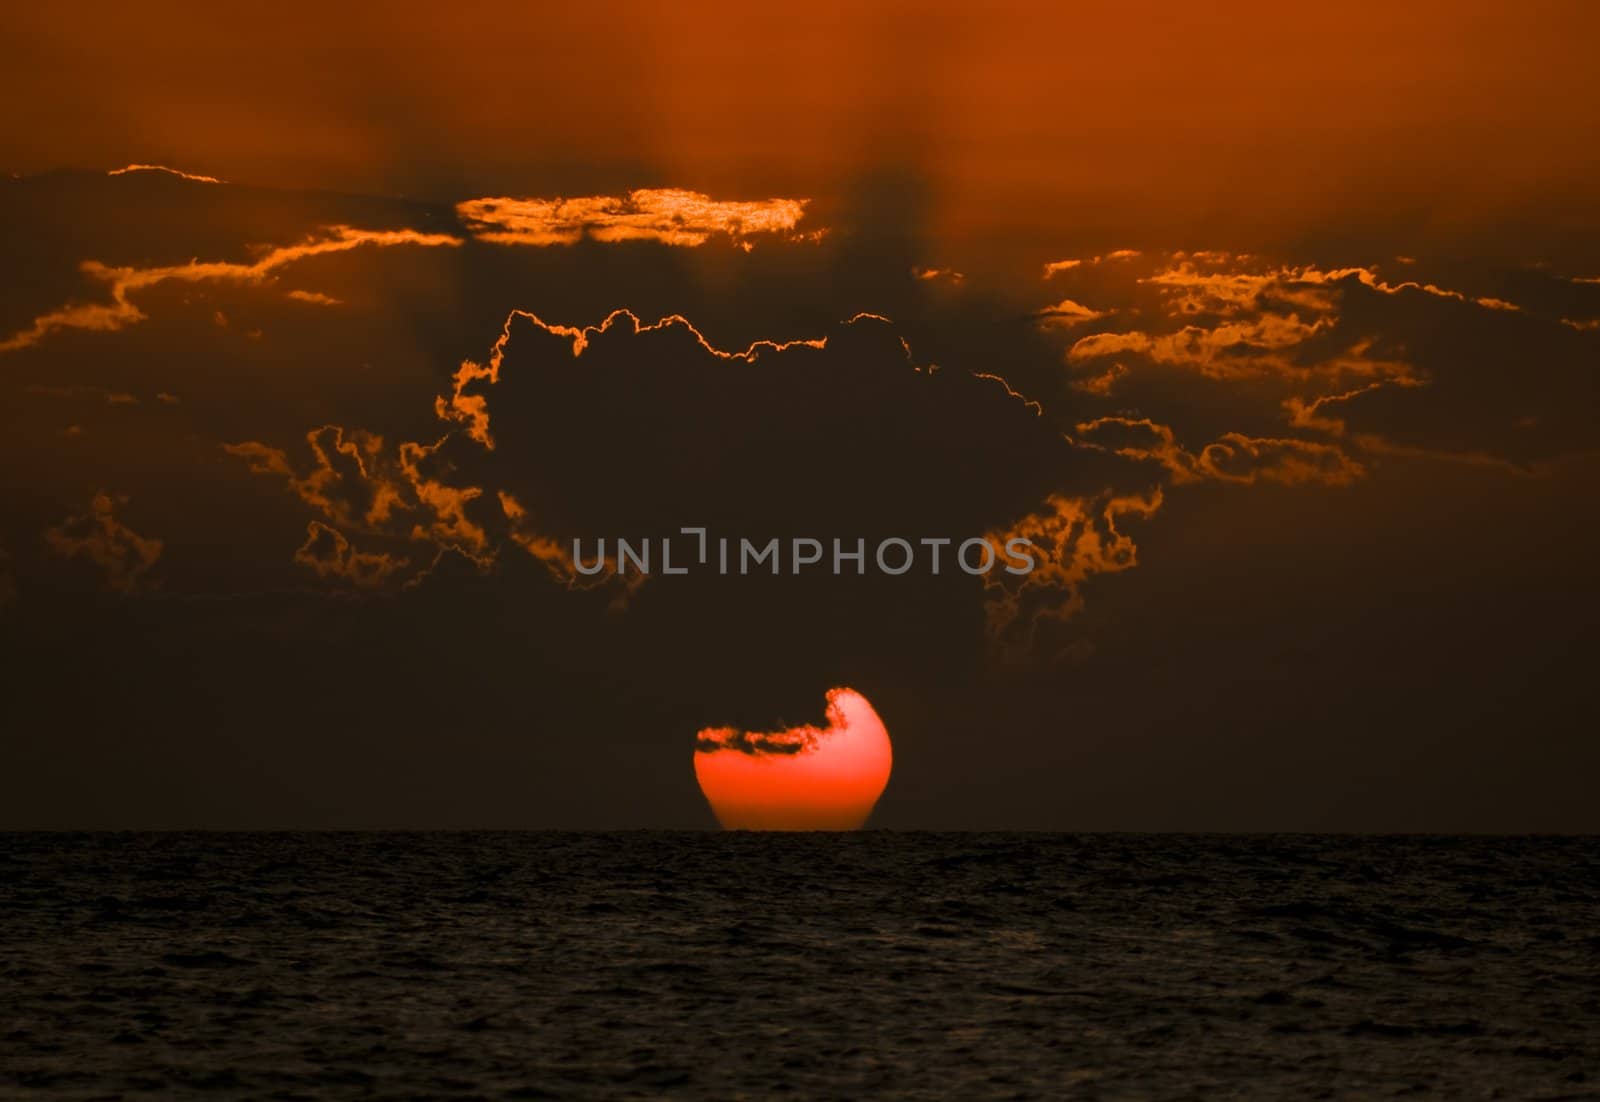 Sunset over ocean with dramatic clouds